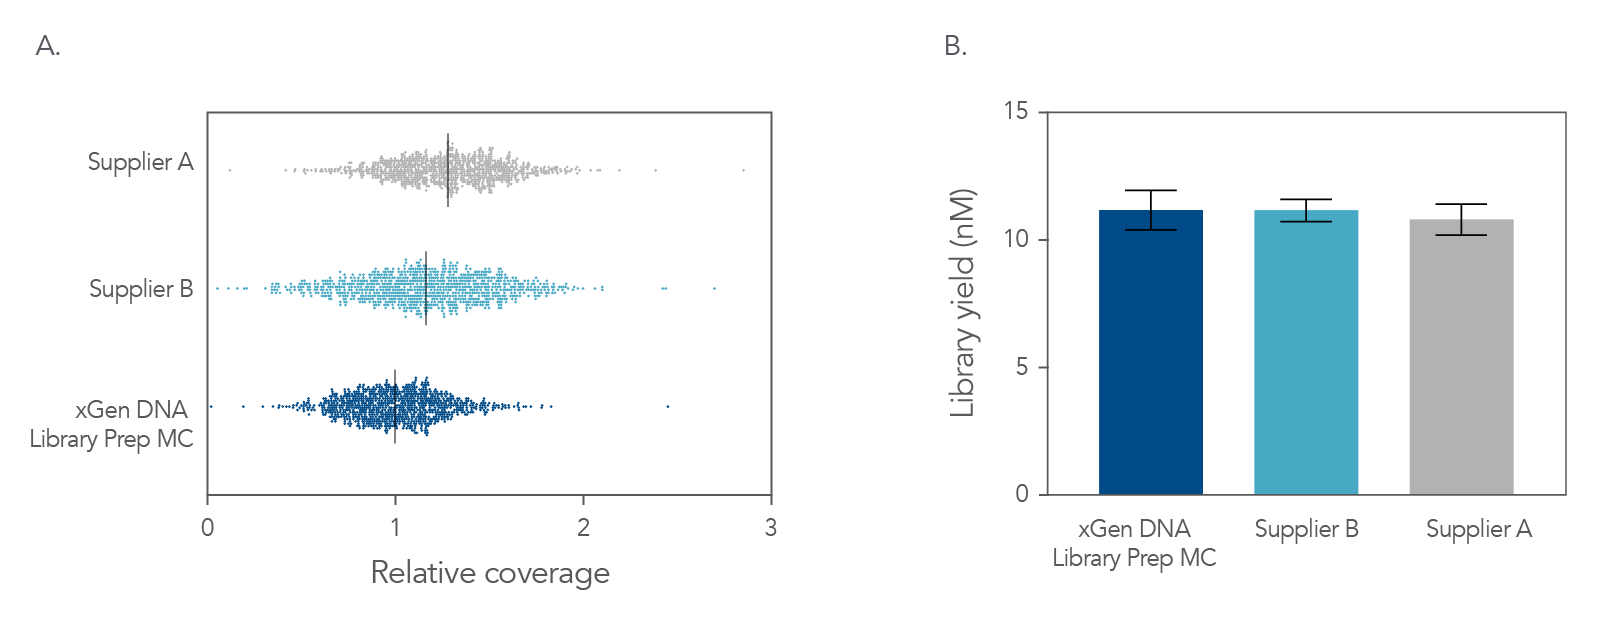 Balanced genome coverage and comparable library yield of xGen DNA Library Prep MC UNI to two other suppliers.